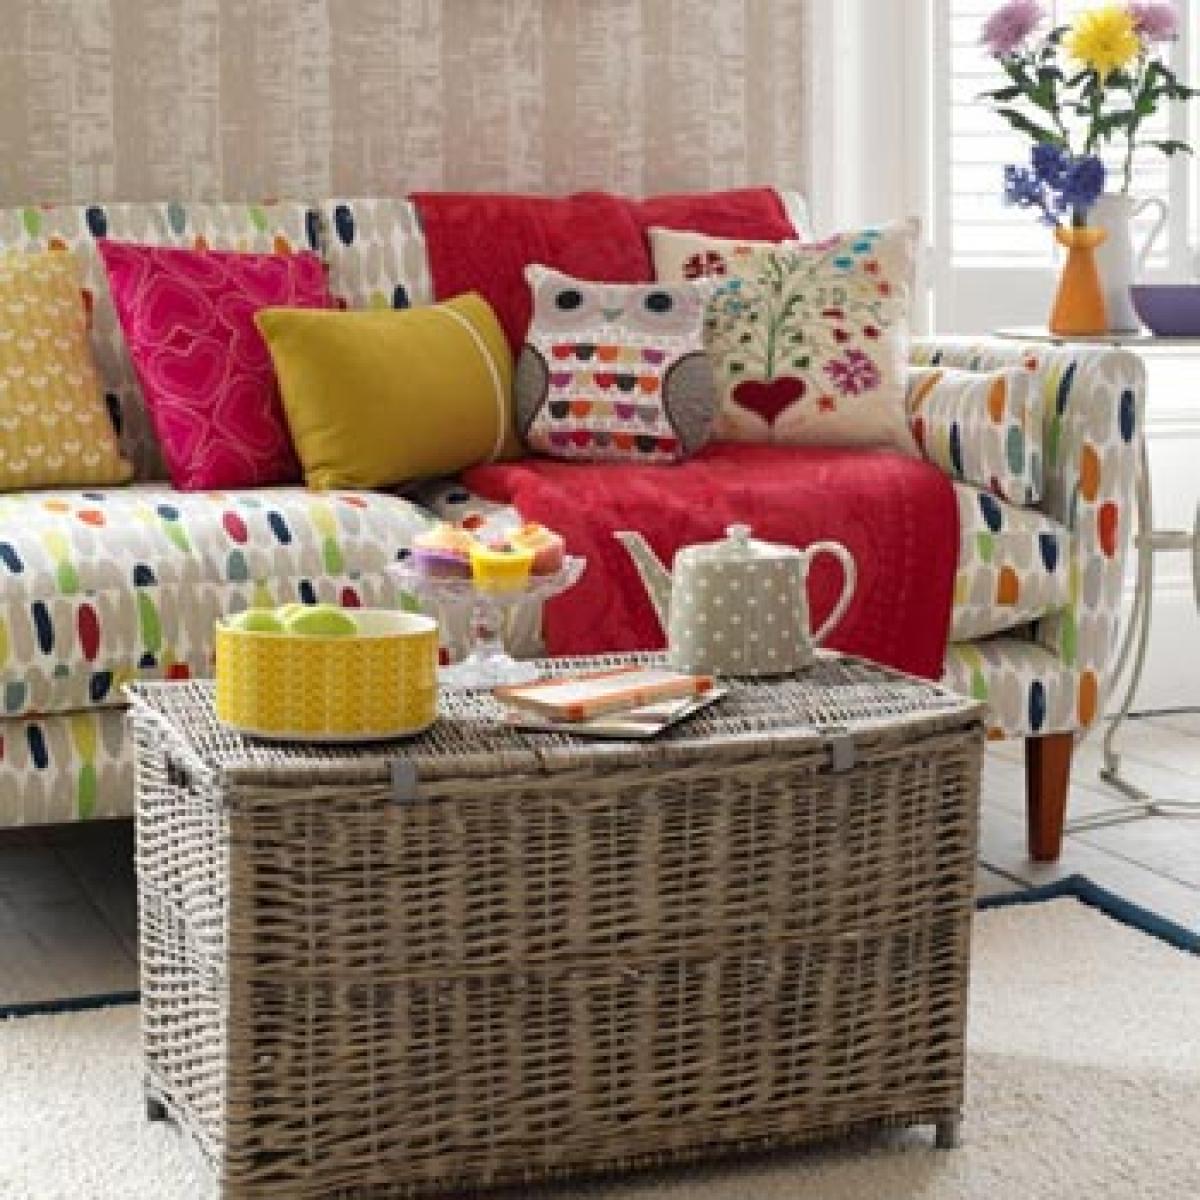 Wicker décor is back this summer!